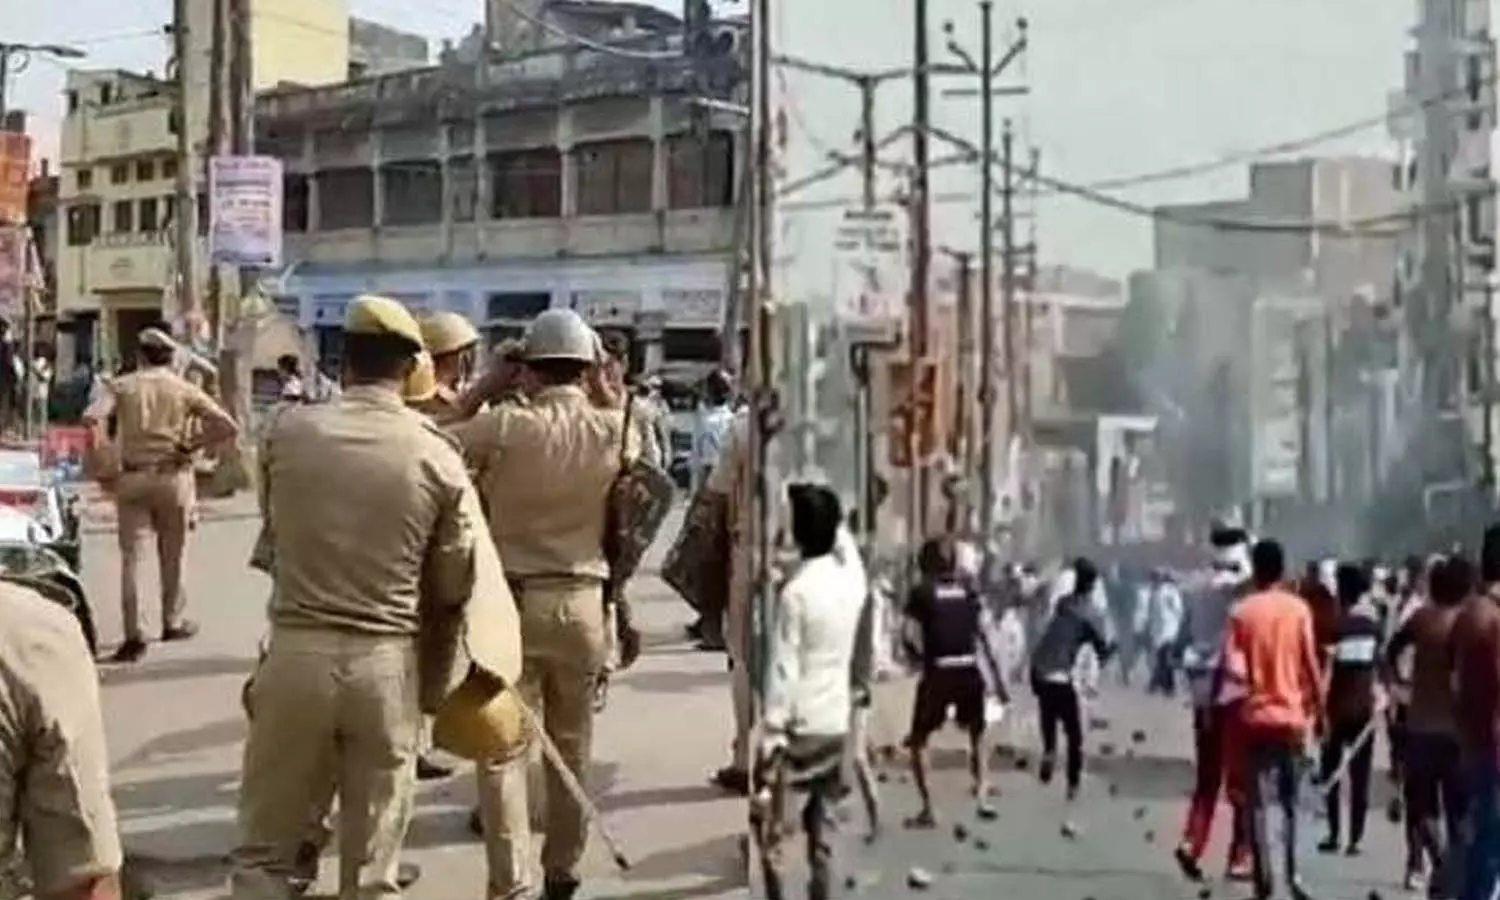 Three accused associated with PFI involved in Kanpur violence arrested, more than 50 arrested so far